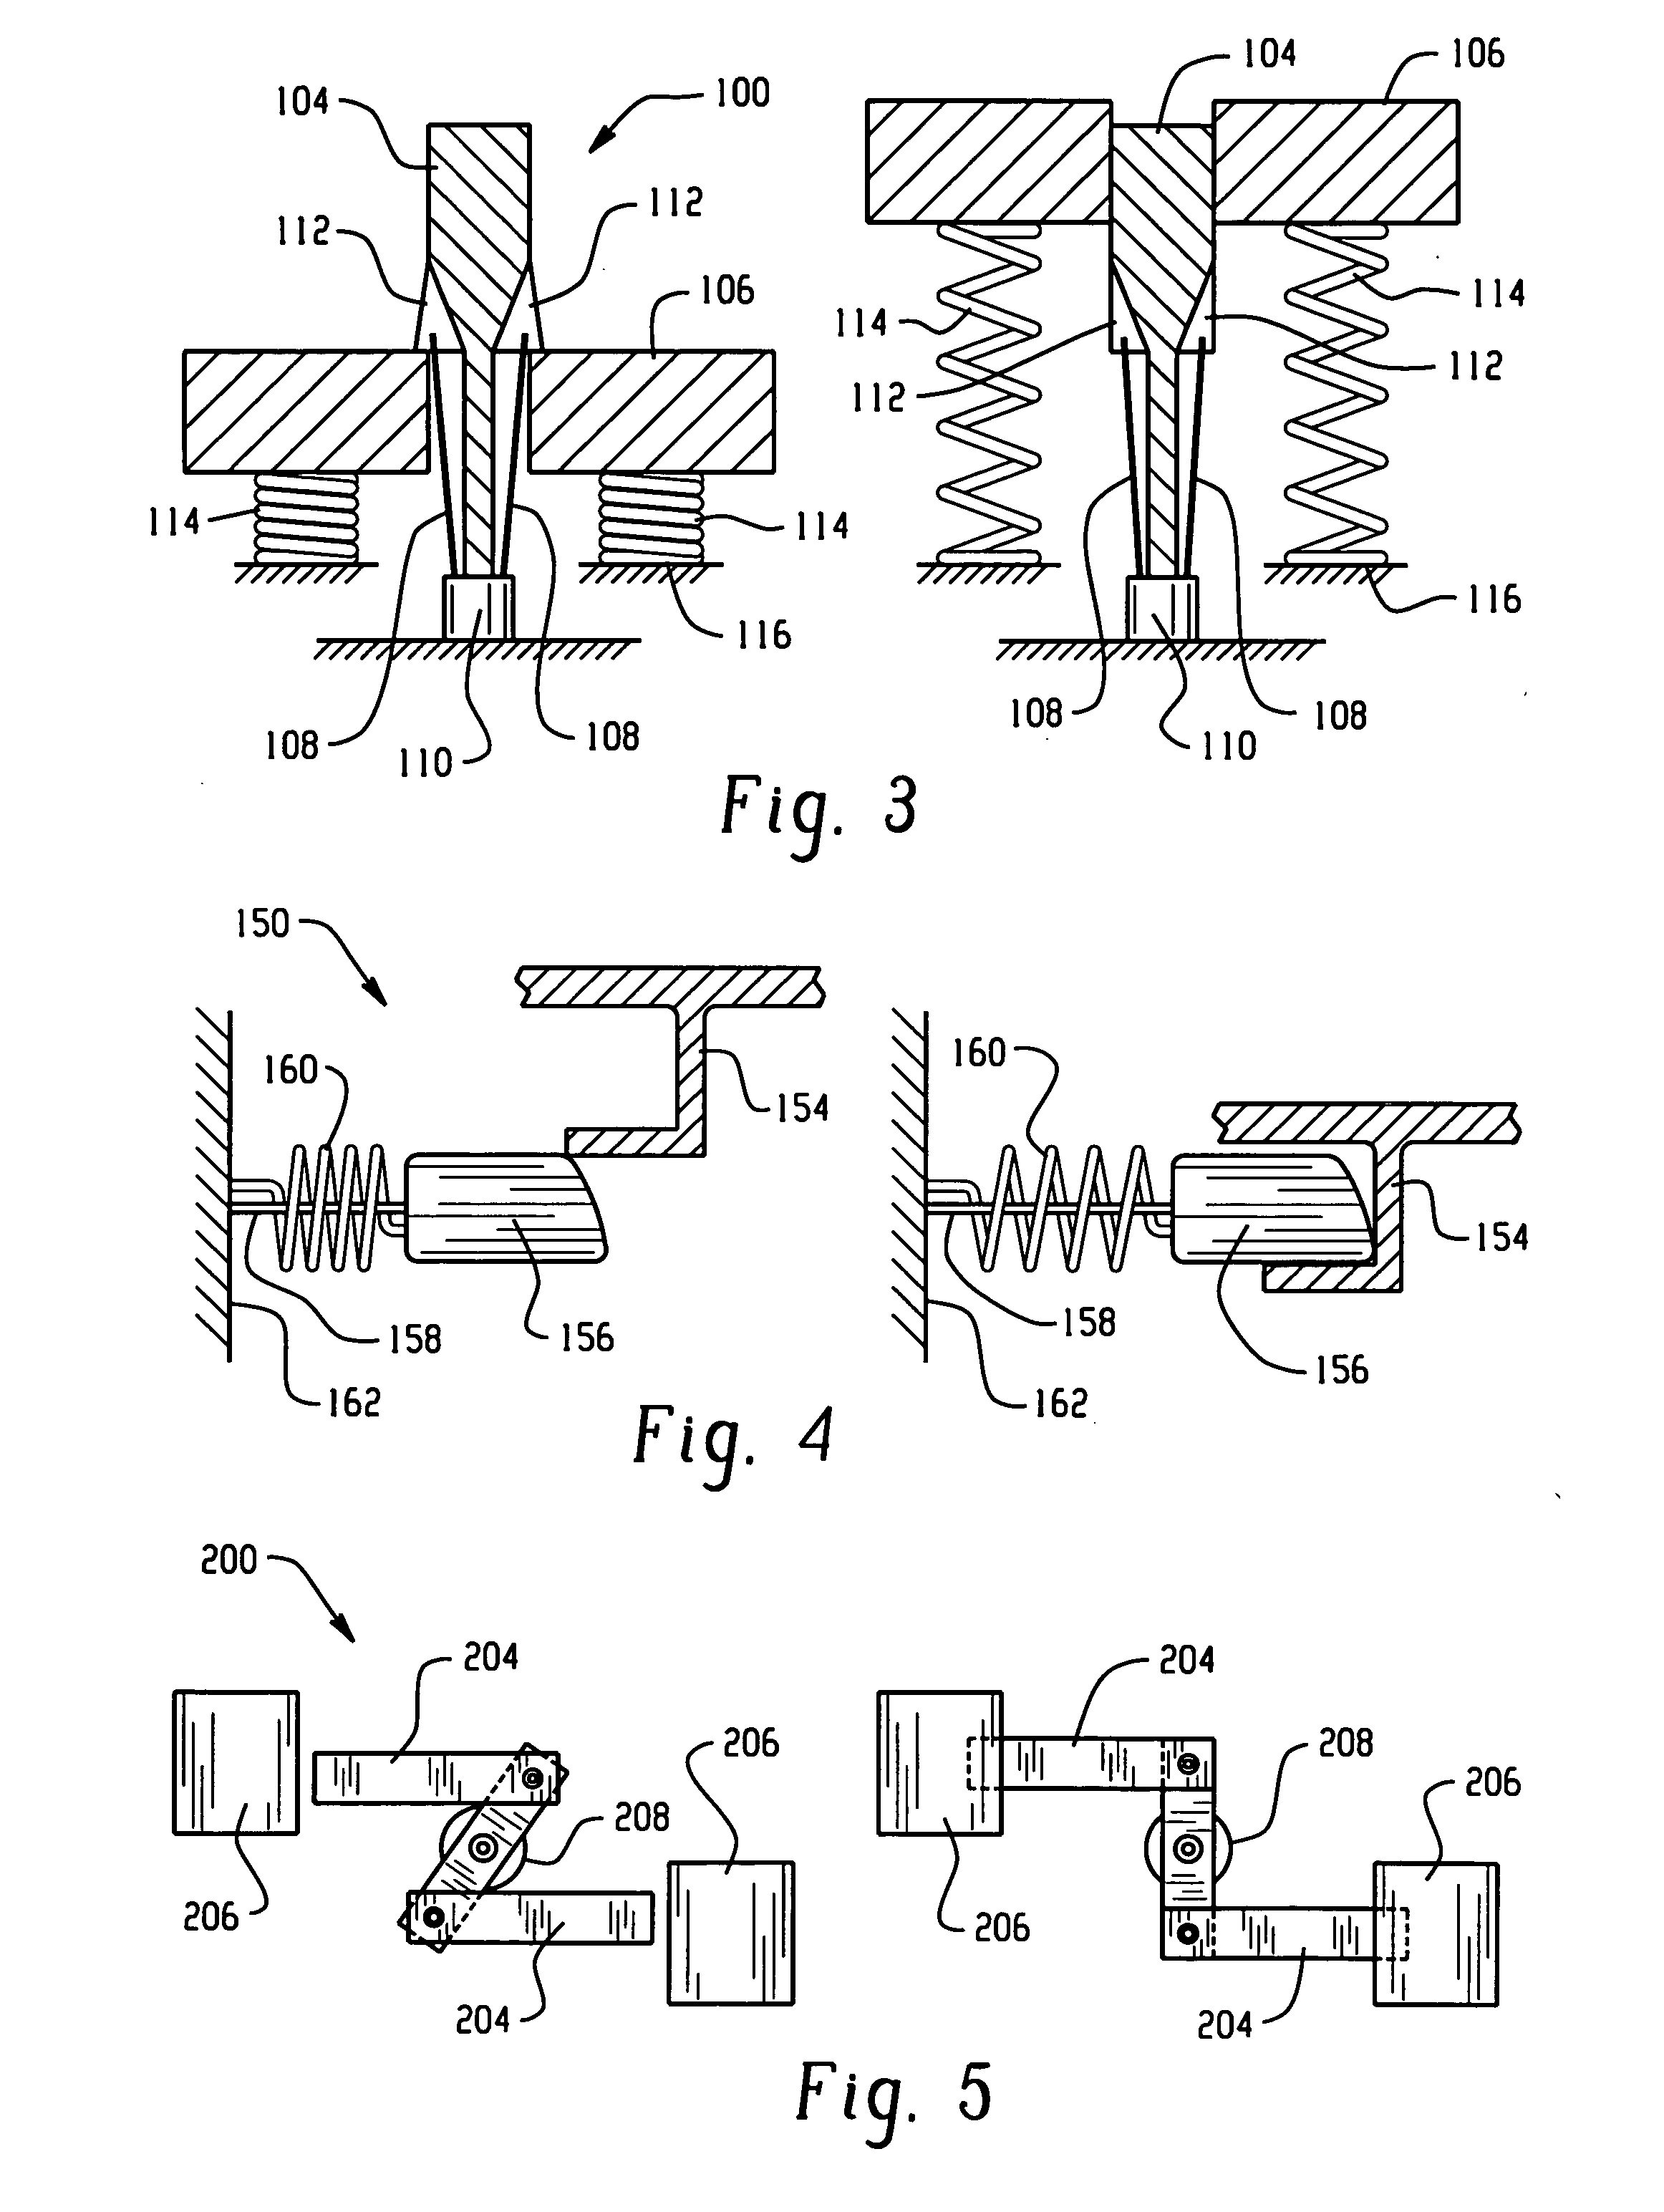 Hood latch assemblies utilizing active materials and methods of use